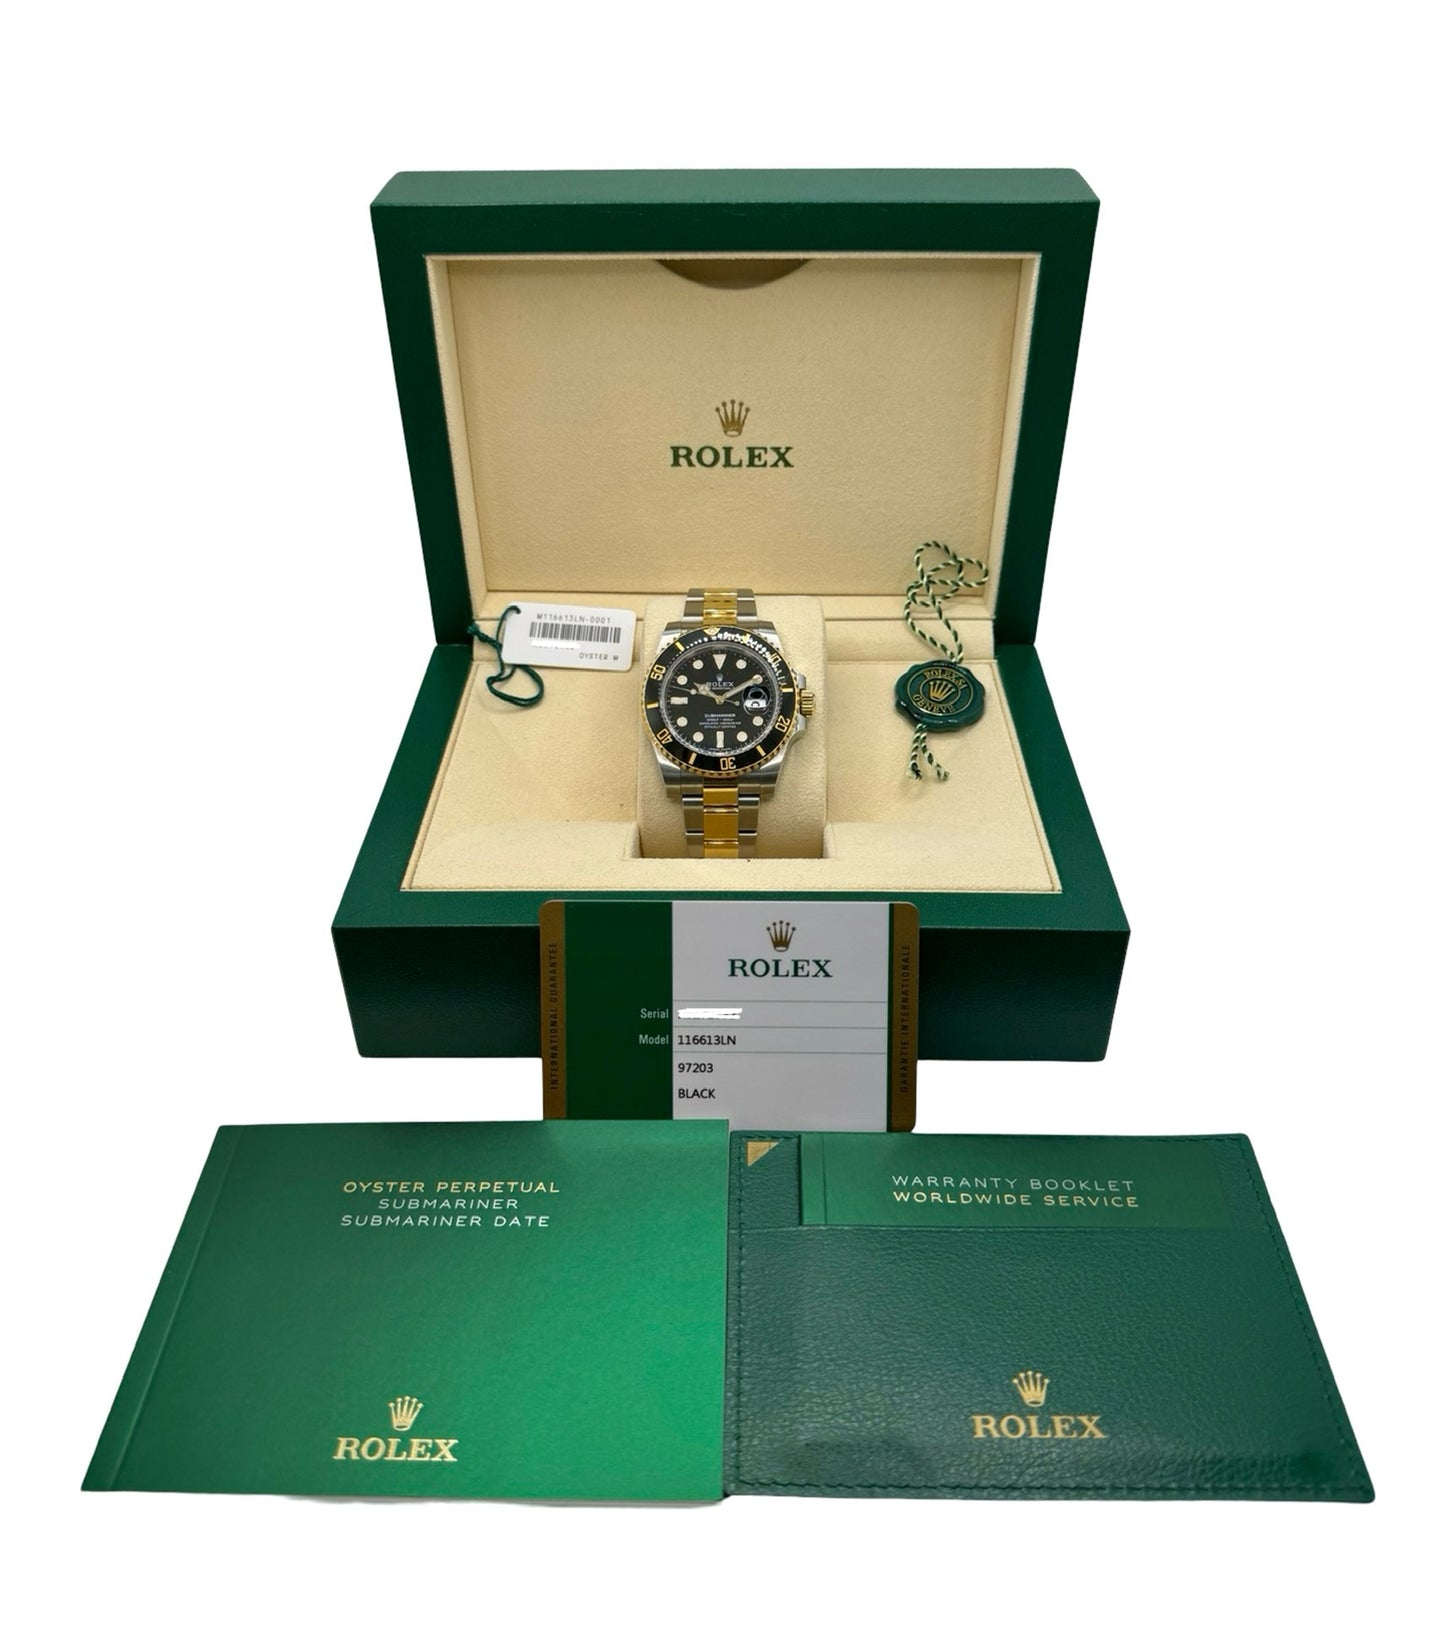 Rolex Submariner Date 18K Yellow Gold and Oystersteel Black Dial 116613LN